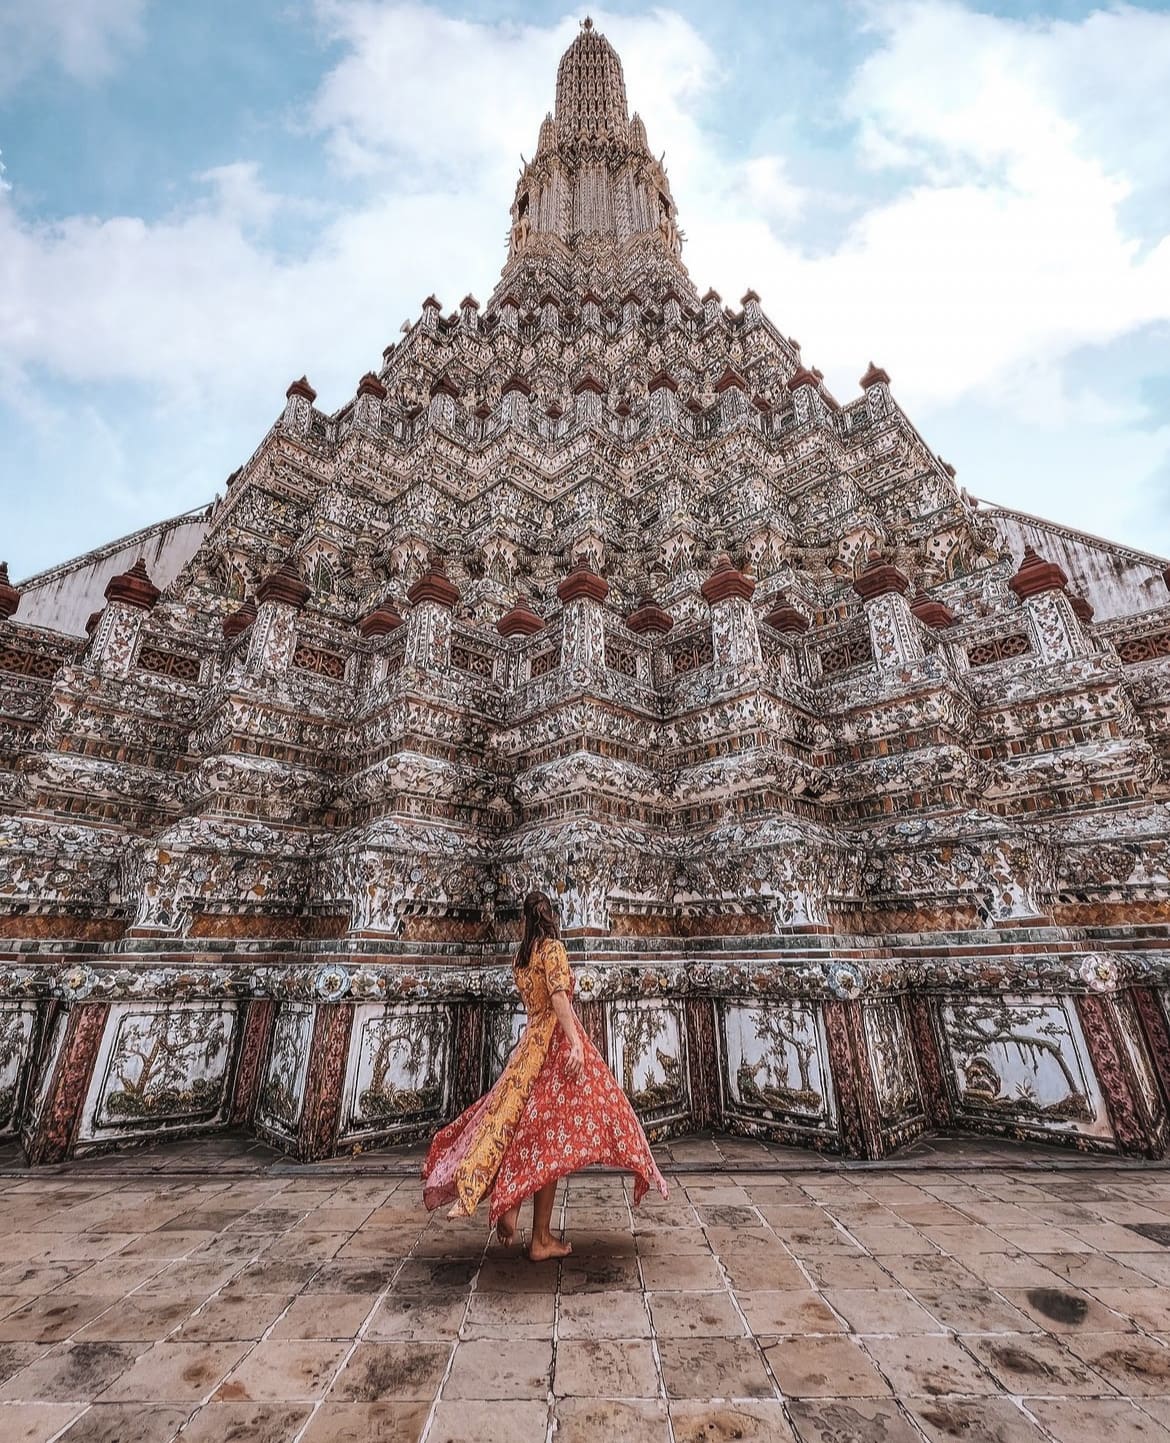 Wat Arun - The 20 Best Things to Do in Bangkok, Thailand